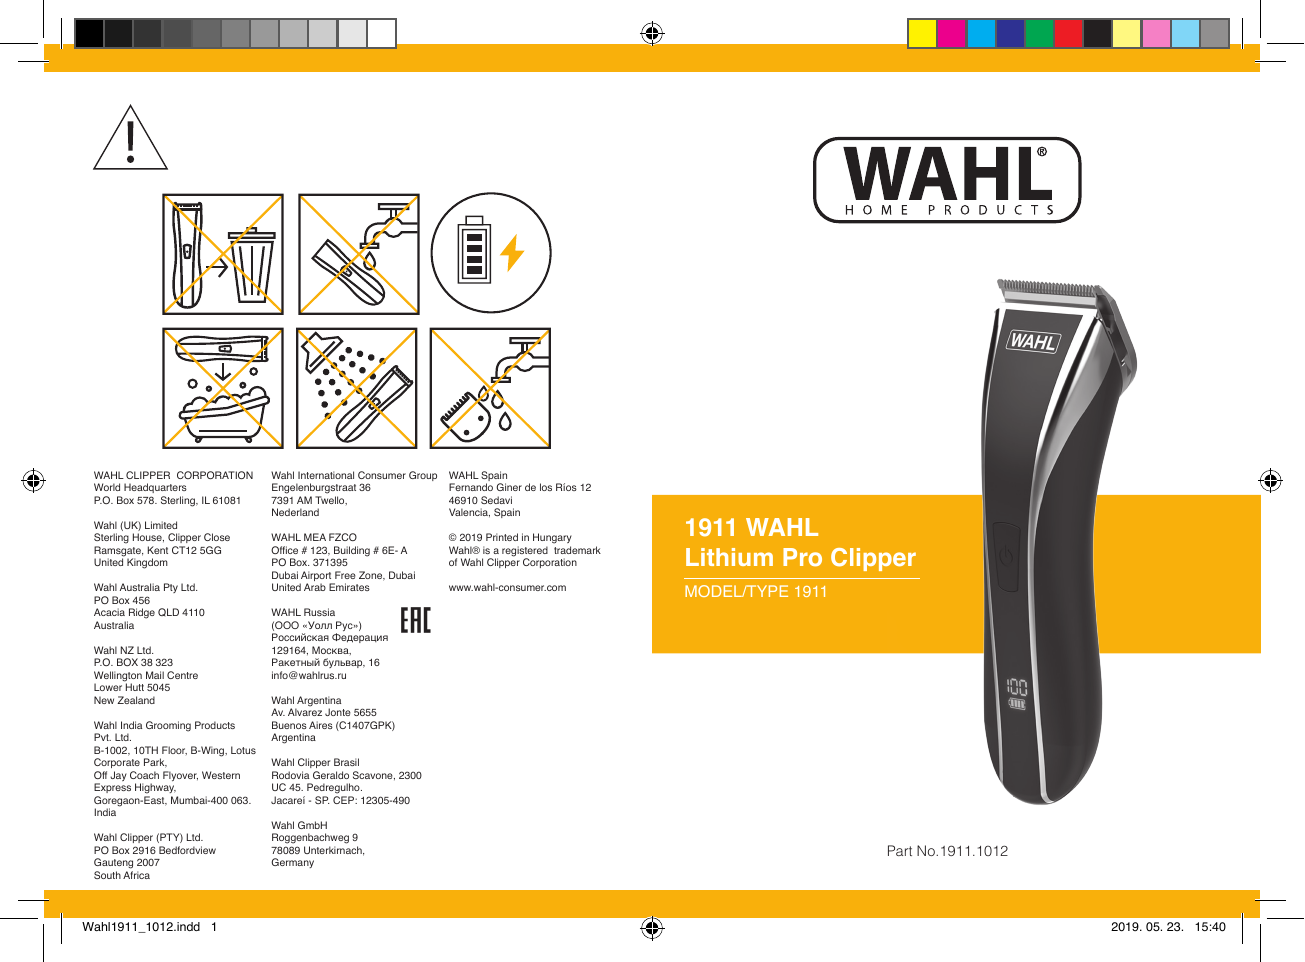 wahl consumer products